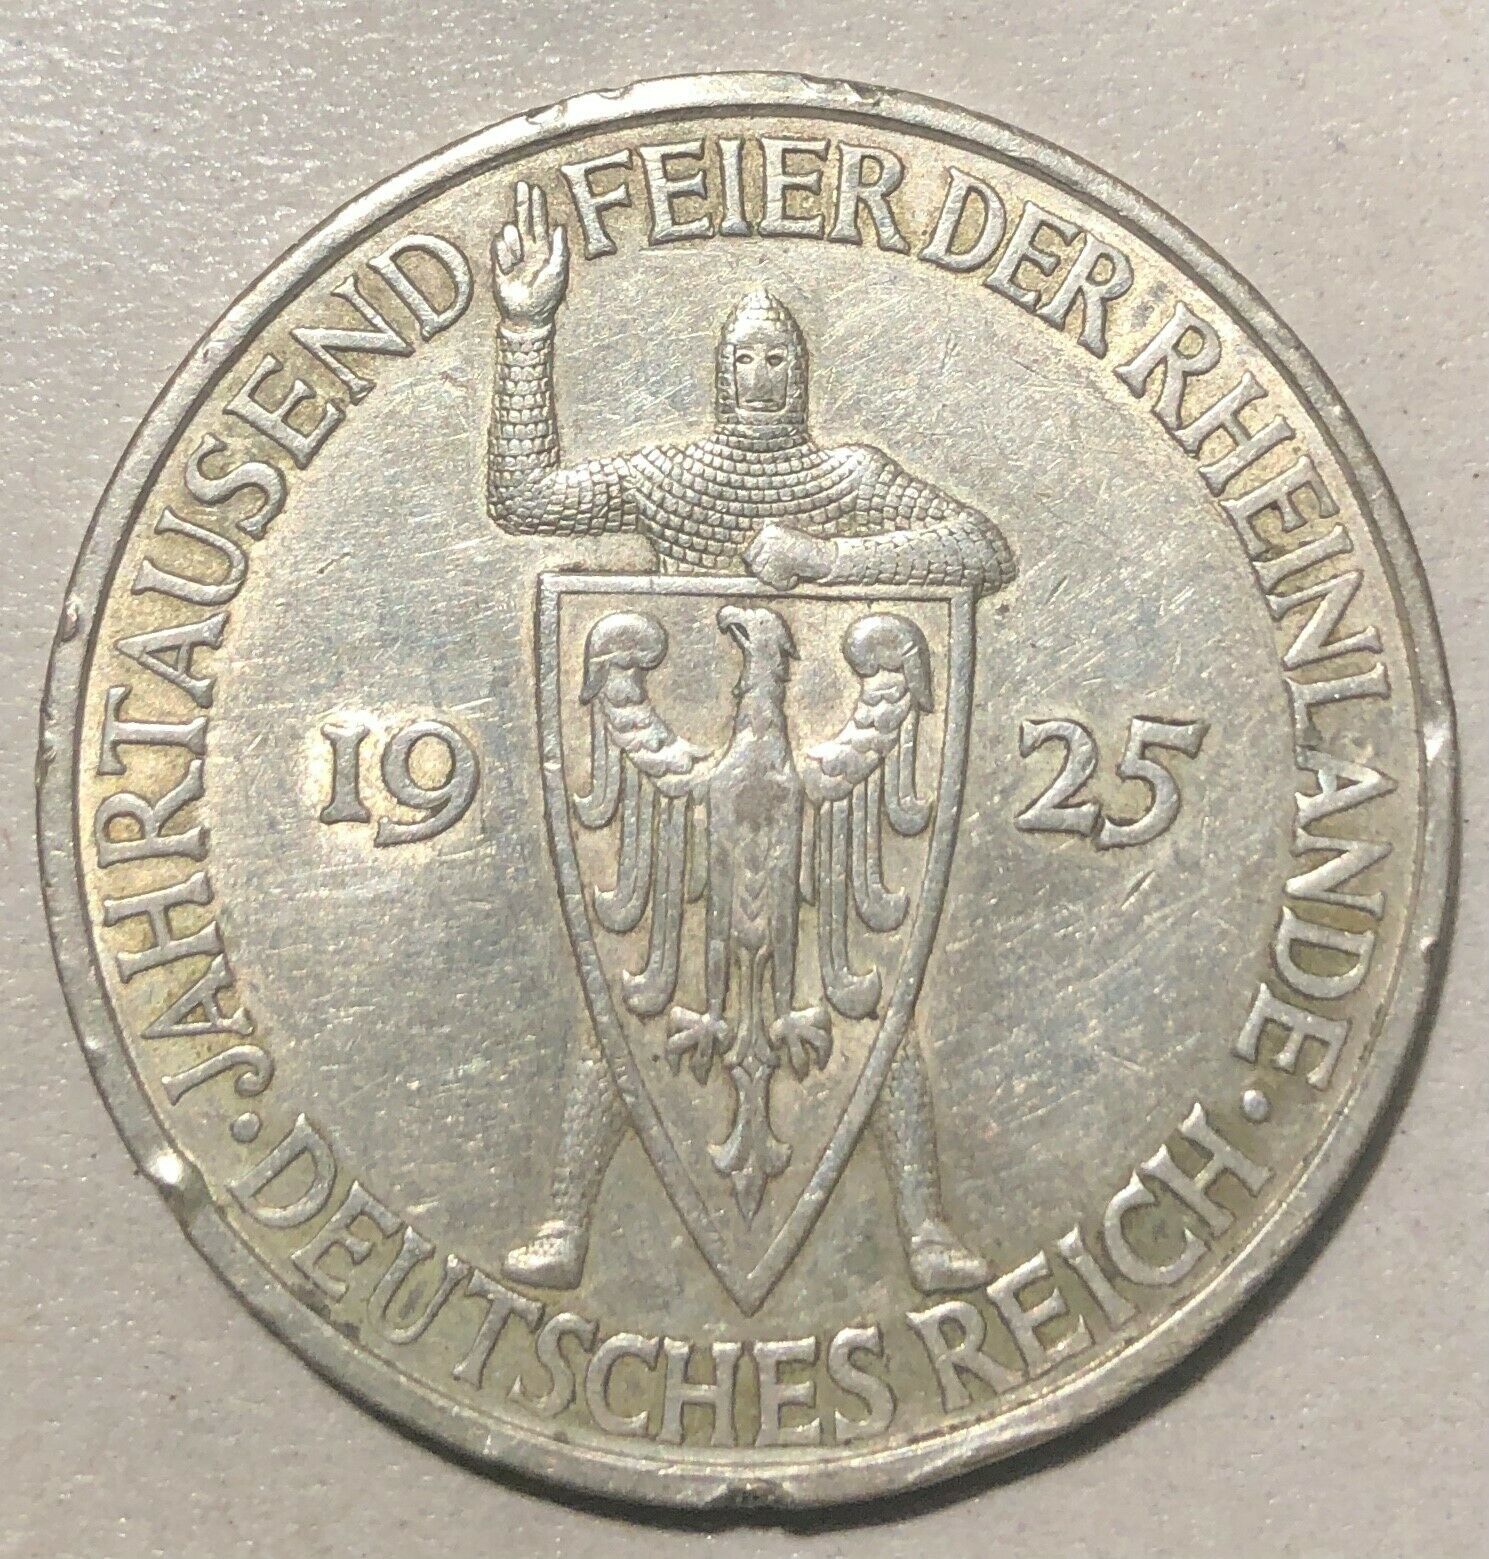 1925 German Silver 5 Mark Coin, Commemorating The 1000th Year Of The Rhineland